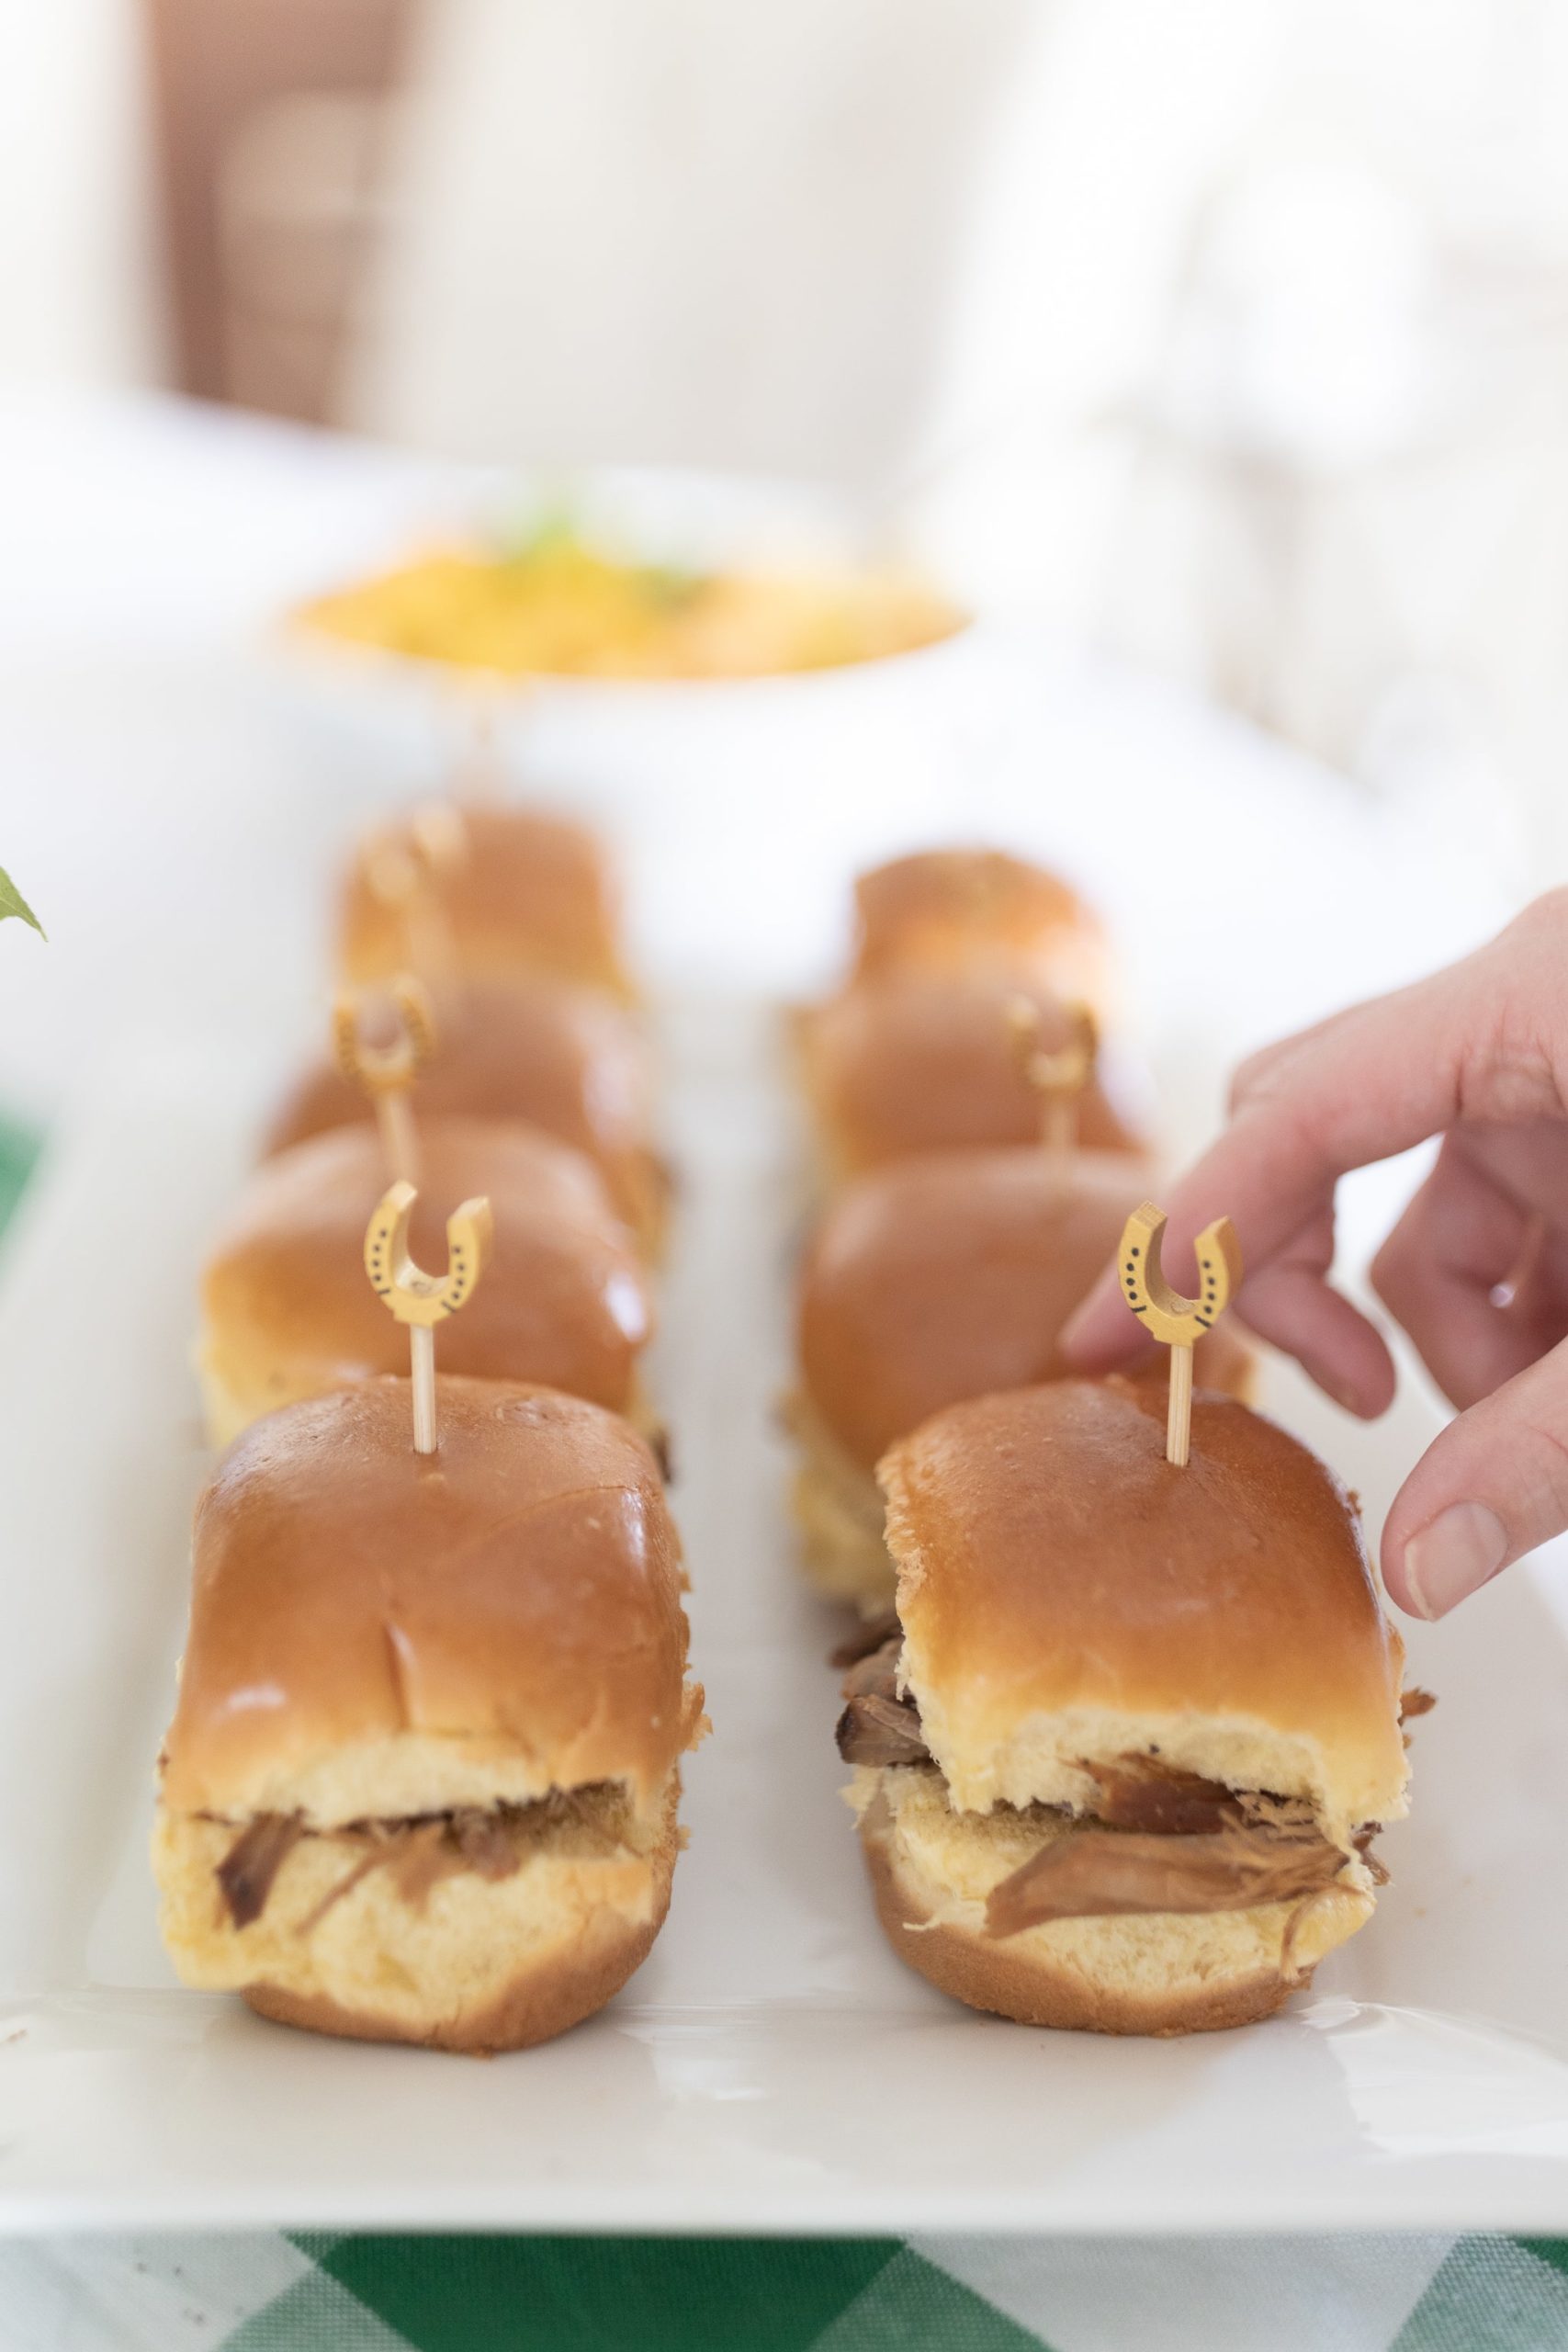 Bourbon pulled pork sliders served with gold horseshoe cocktail picks by southern blogger Stephanie Ziajka on Diary of a Debutante